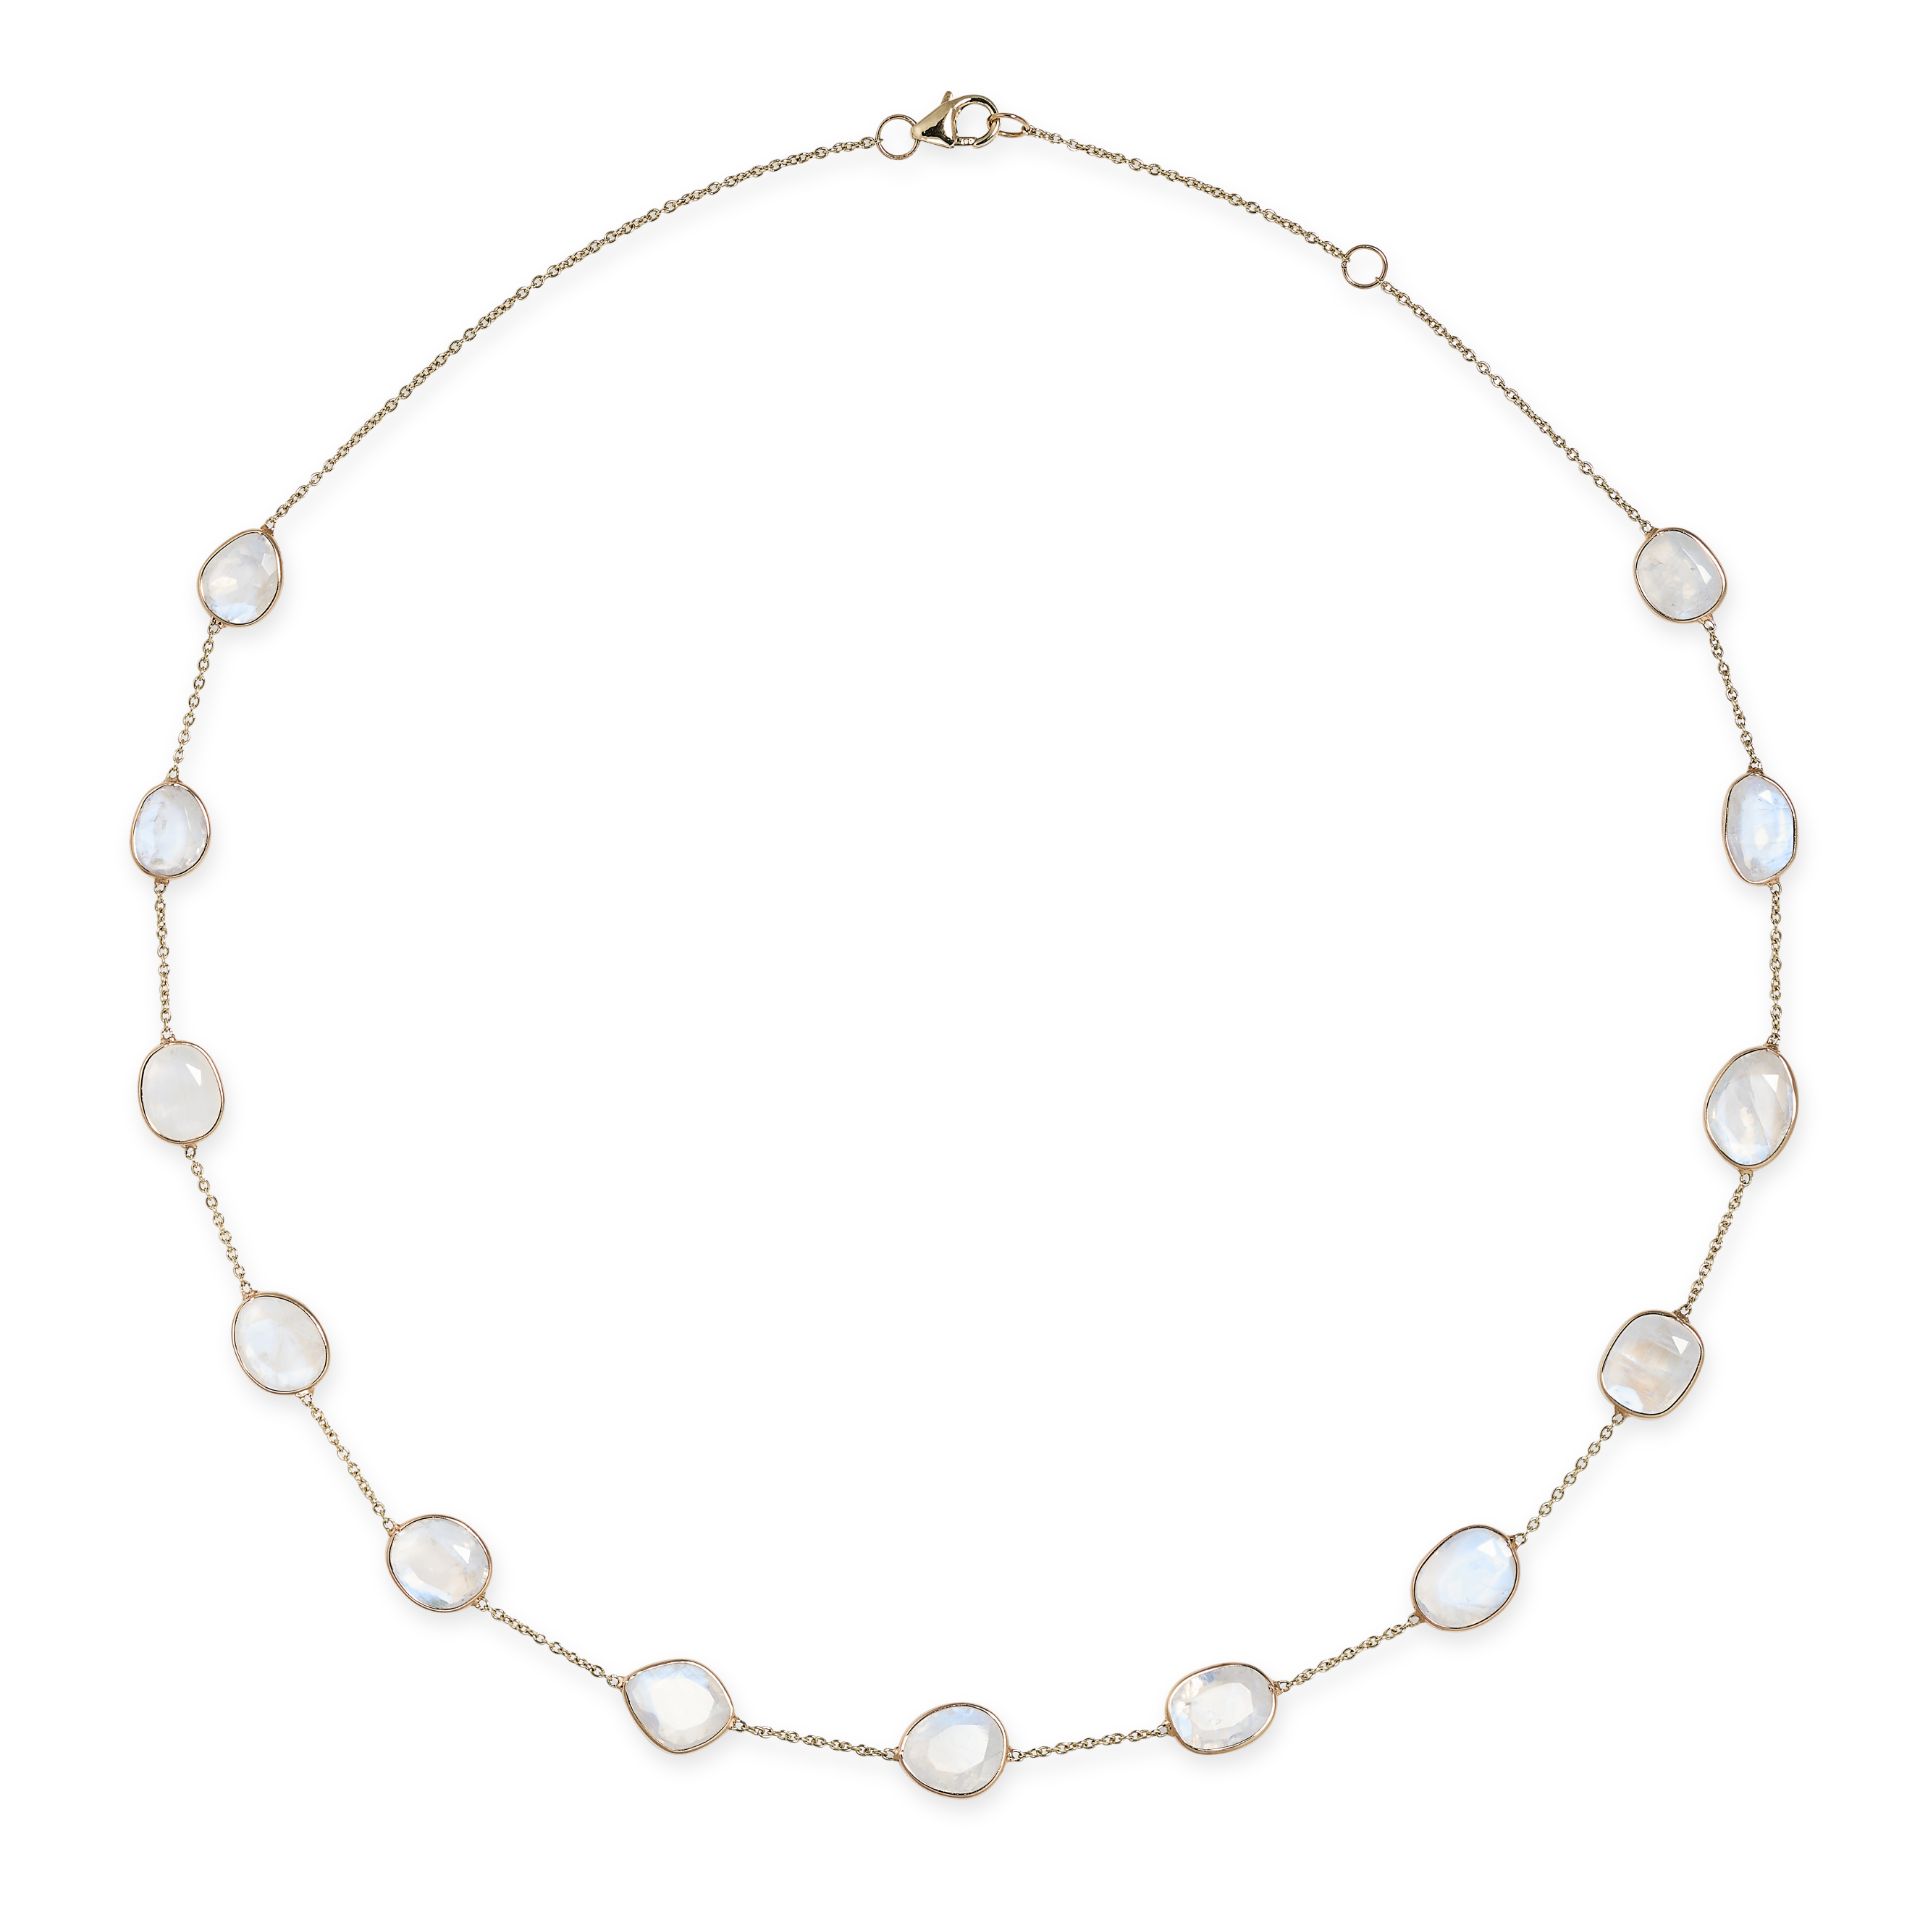 A RAINBOW MOONSTONE NECKLACE in 14ct yellow gold, the trace chain punctuated by thirteen fancy sh...